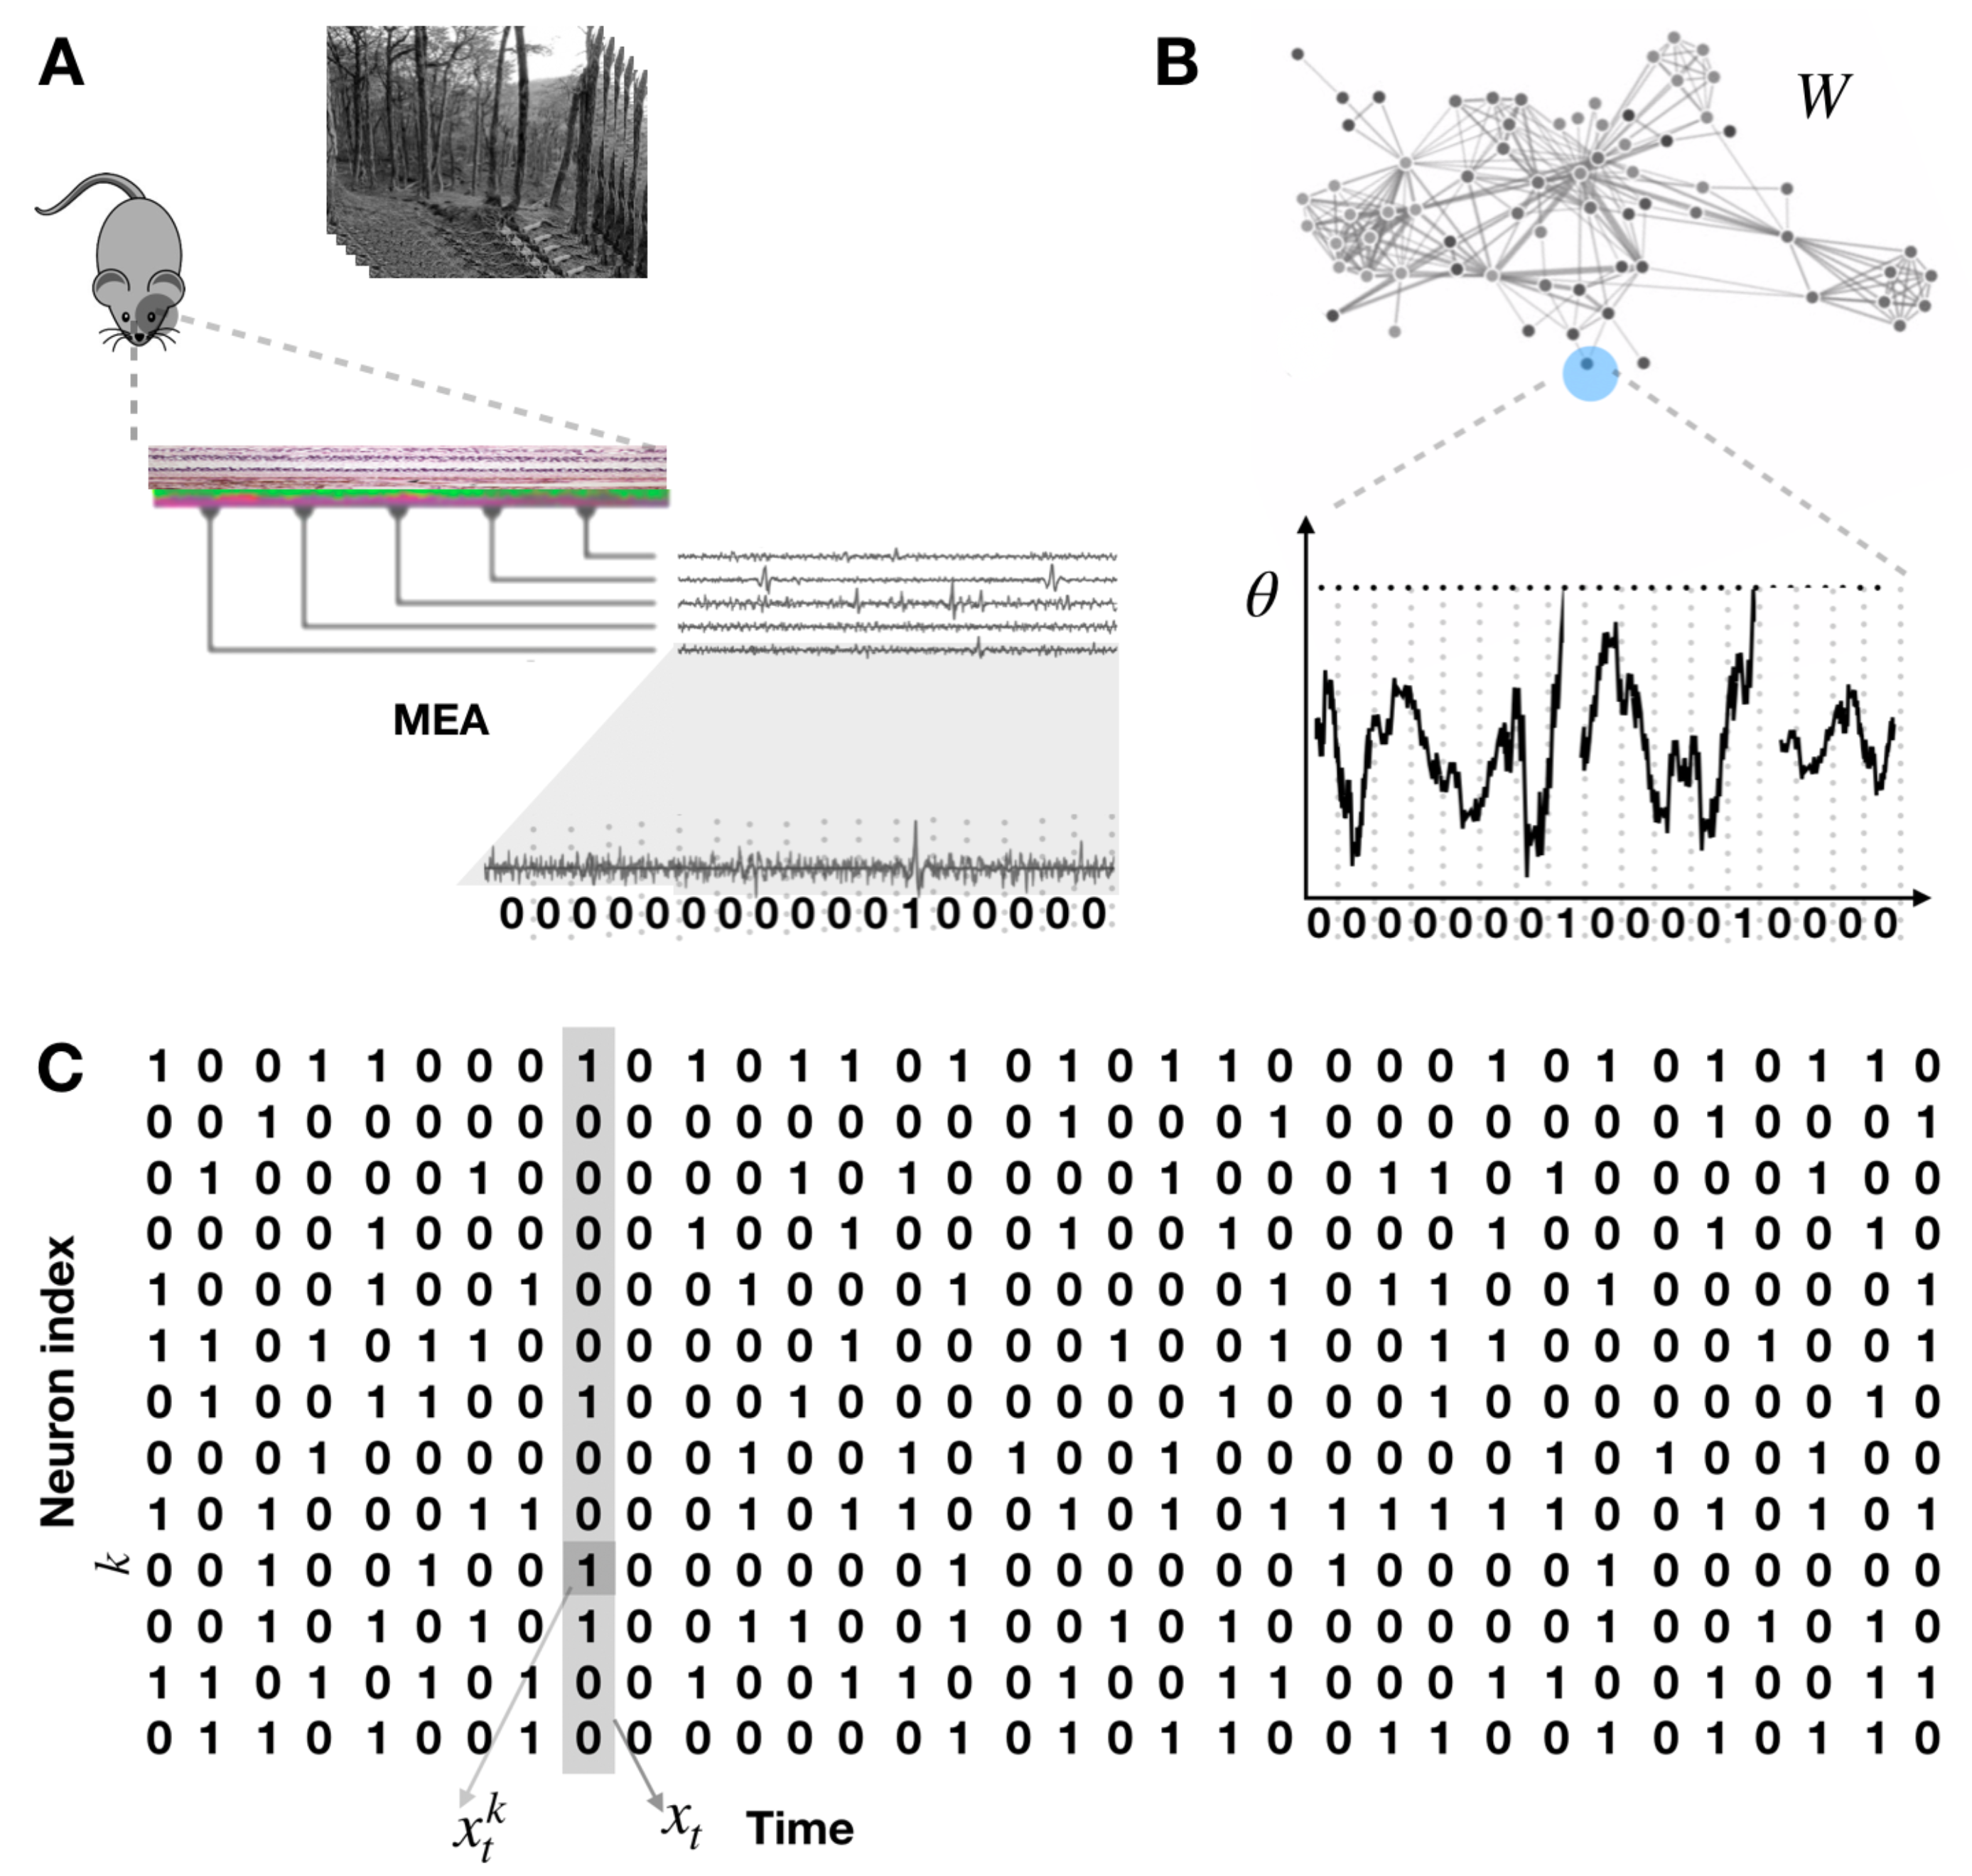 From experimental spike trains to mathematical modelling.(A) Experimental set-up. MEA detect spikes from living neuronal tissue. In this illustration, the retina of a mammalian is put into the MEA and submitted to natural light stimuli. The membrane potential of retinal ganglion cells is recorded and analysed to extract the spikes using spike sorting algorithms. (B) Mathematical models of biophysically inspired spiking networks can be used to study spike trains. Top. Neurons, considered here as points in a lattice, interact via synaptic connections on an oriented weighted graph where the matrix of weights is denoted WW. Bottom. A prominent mathematical class of models is the Integrate and Fire model where the membrane potential is modelled by a stochastic differential equation (black trajectory) with threshold condition θ\theta . The neuron is considered to spike whenever the membrane potential reaches the threshold. Then, it is reset to some constant value. Binning time using windows of a few ms length, one can associate the continuous-time trajectory of the membrane potential with a discrete-time sequence of 0s and 1s characterising the spike state of the neuron in each time window. (C) Spike trains. Using the binary representation at the bottom of (B) for each neuron in a network one obtains sequences of binary spike patterns (spike trains) symbolically representing the underlying neuronal dynamics.
